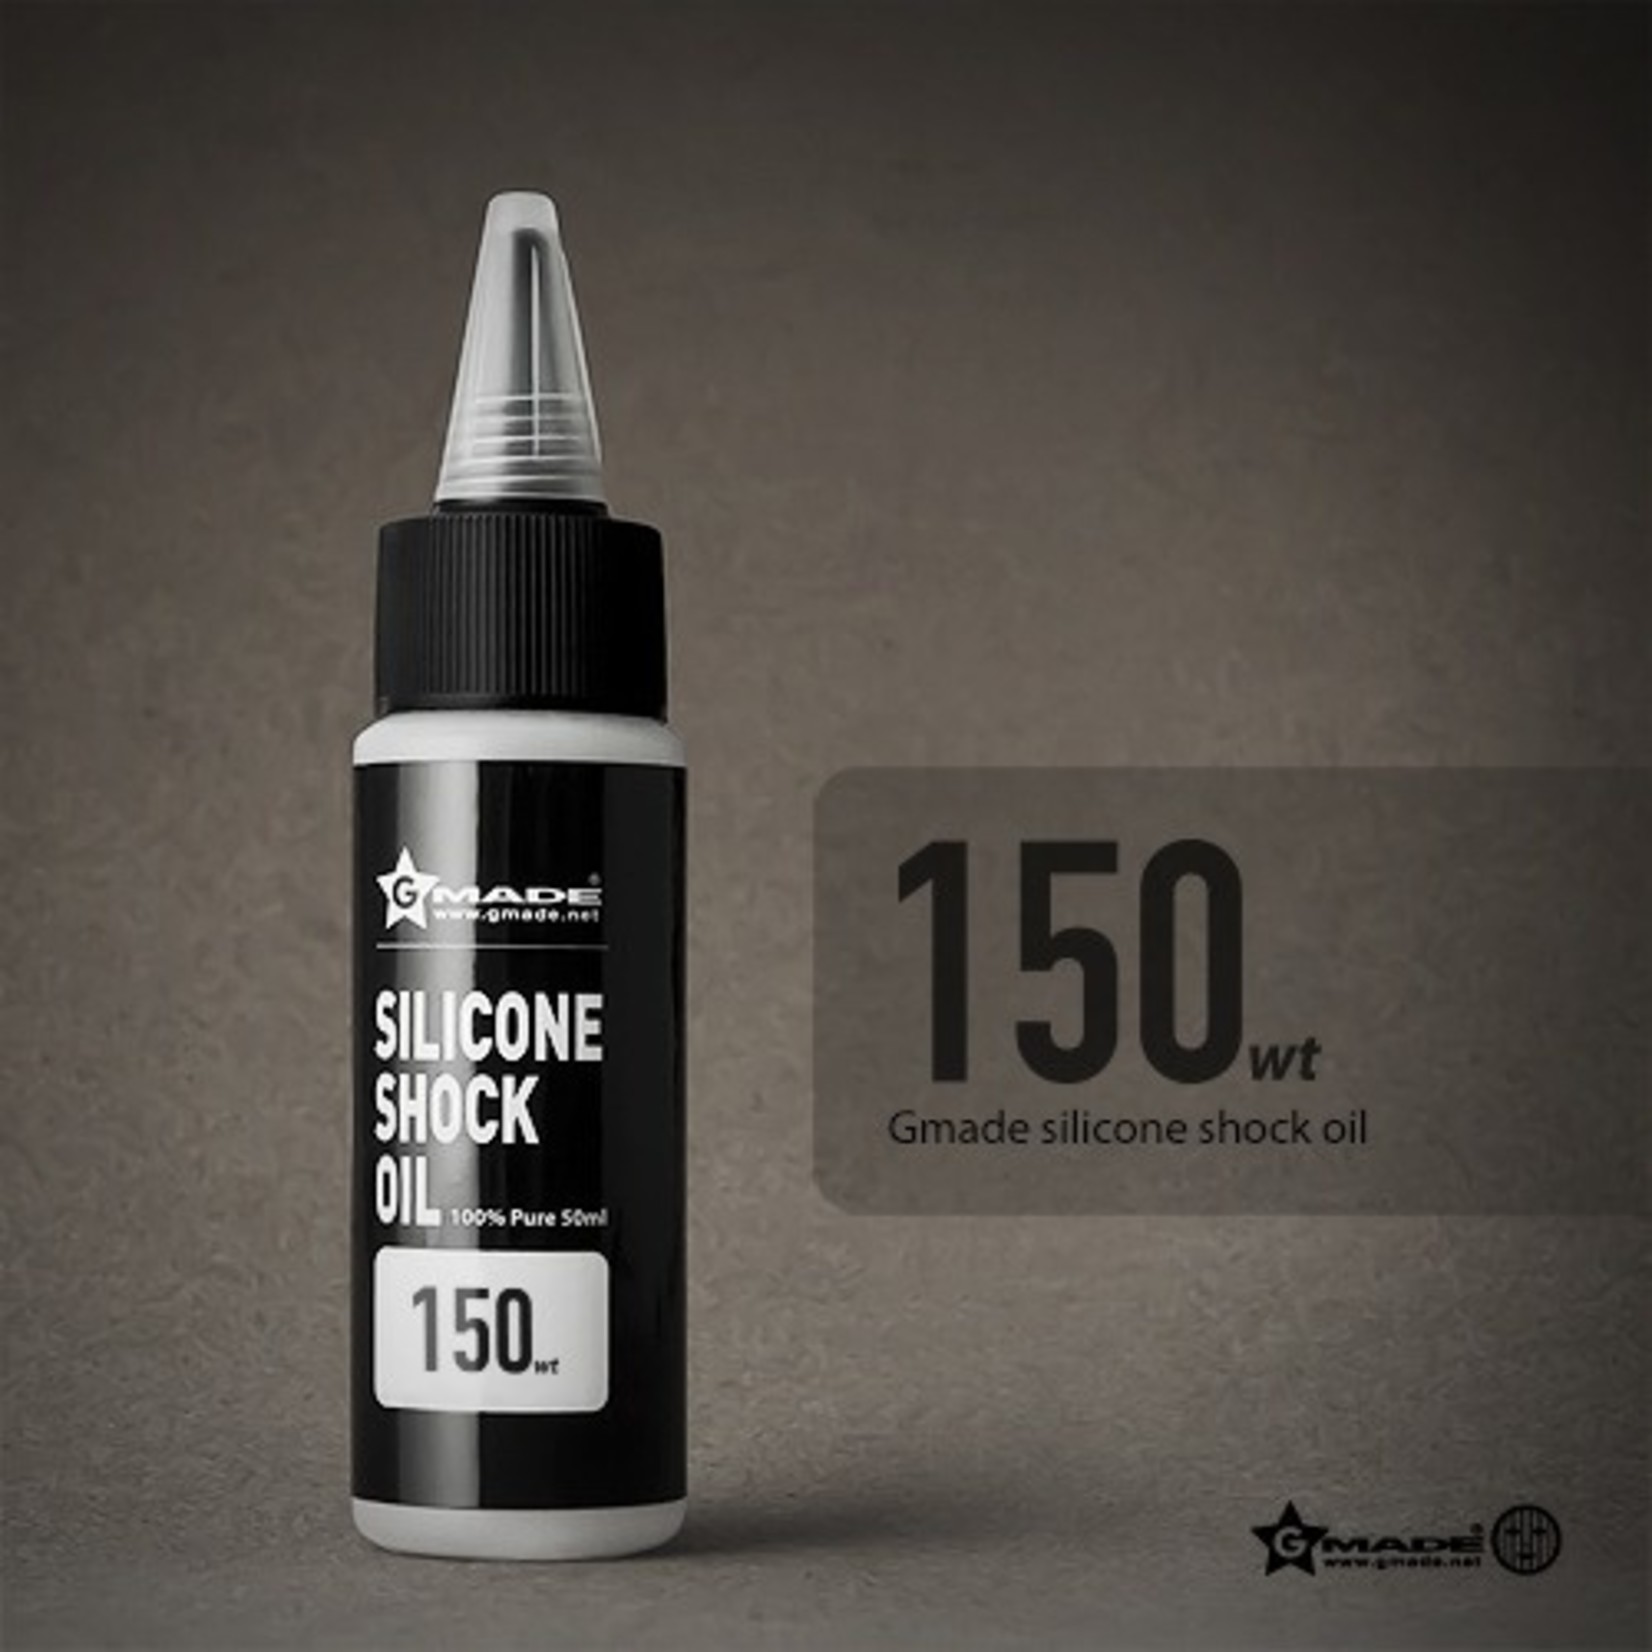 Gmade Silicone Shock Oil 150 Weight 50 Ml